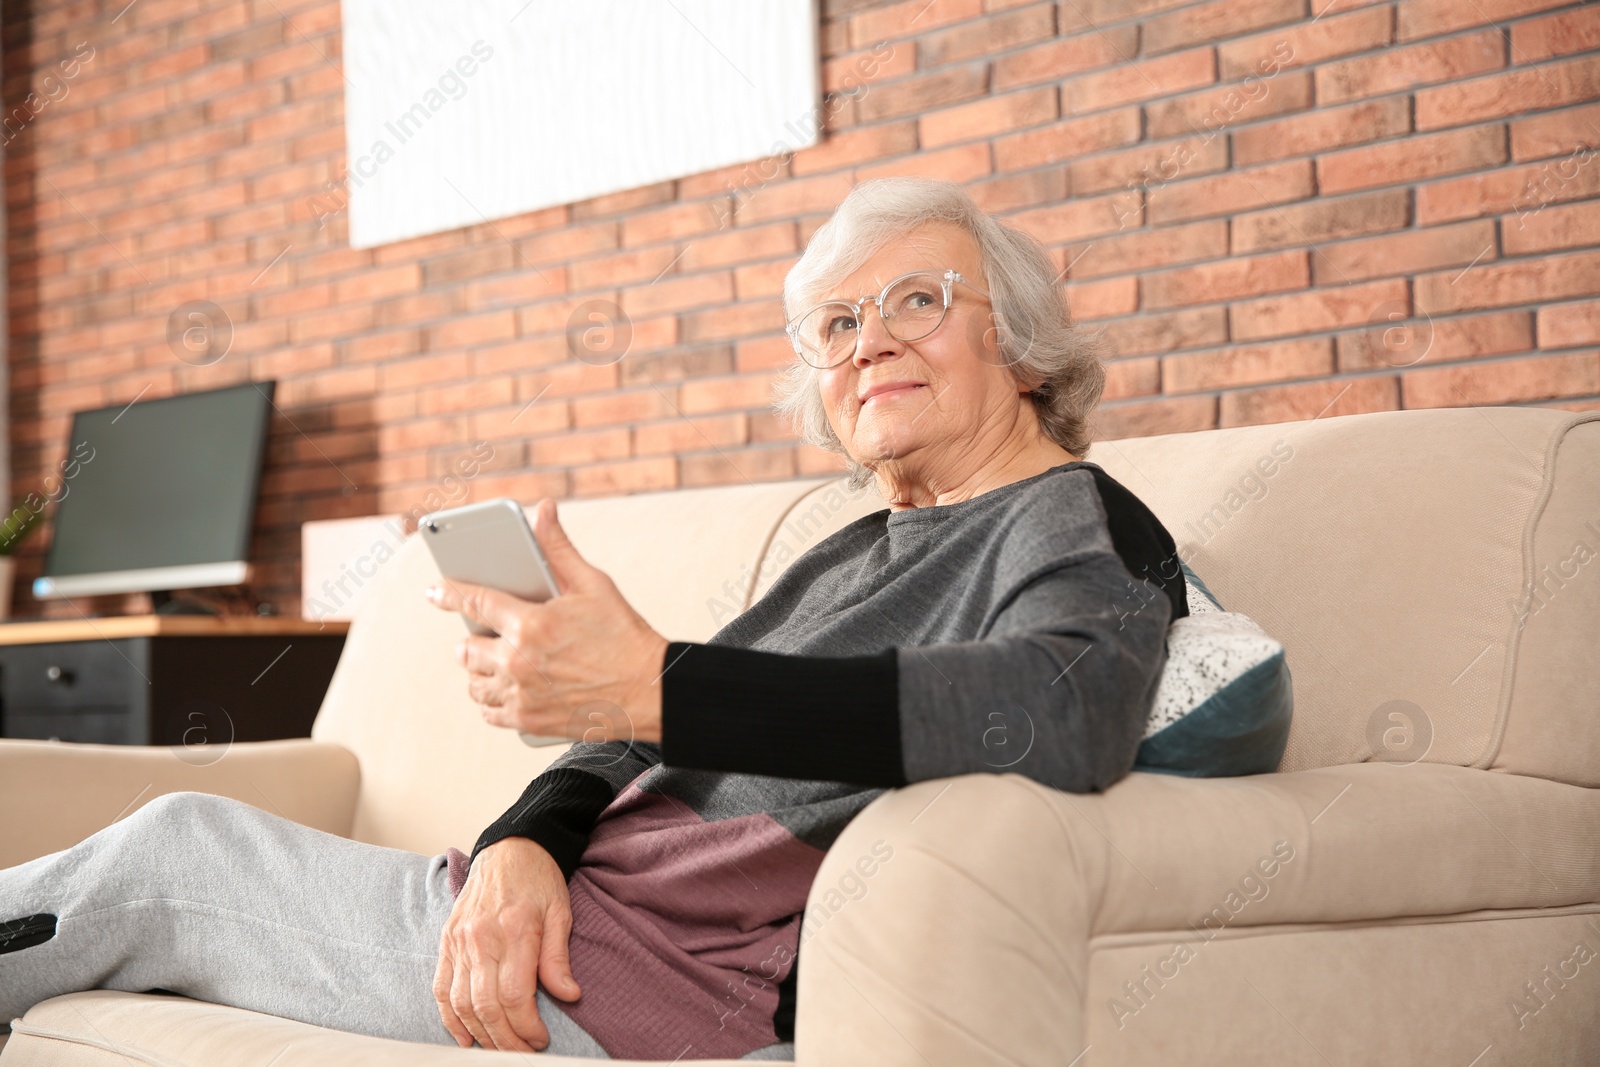 Photo of Elderly woman using smartphone on sofa in living room